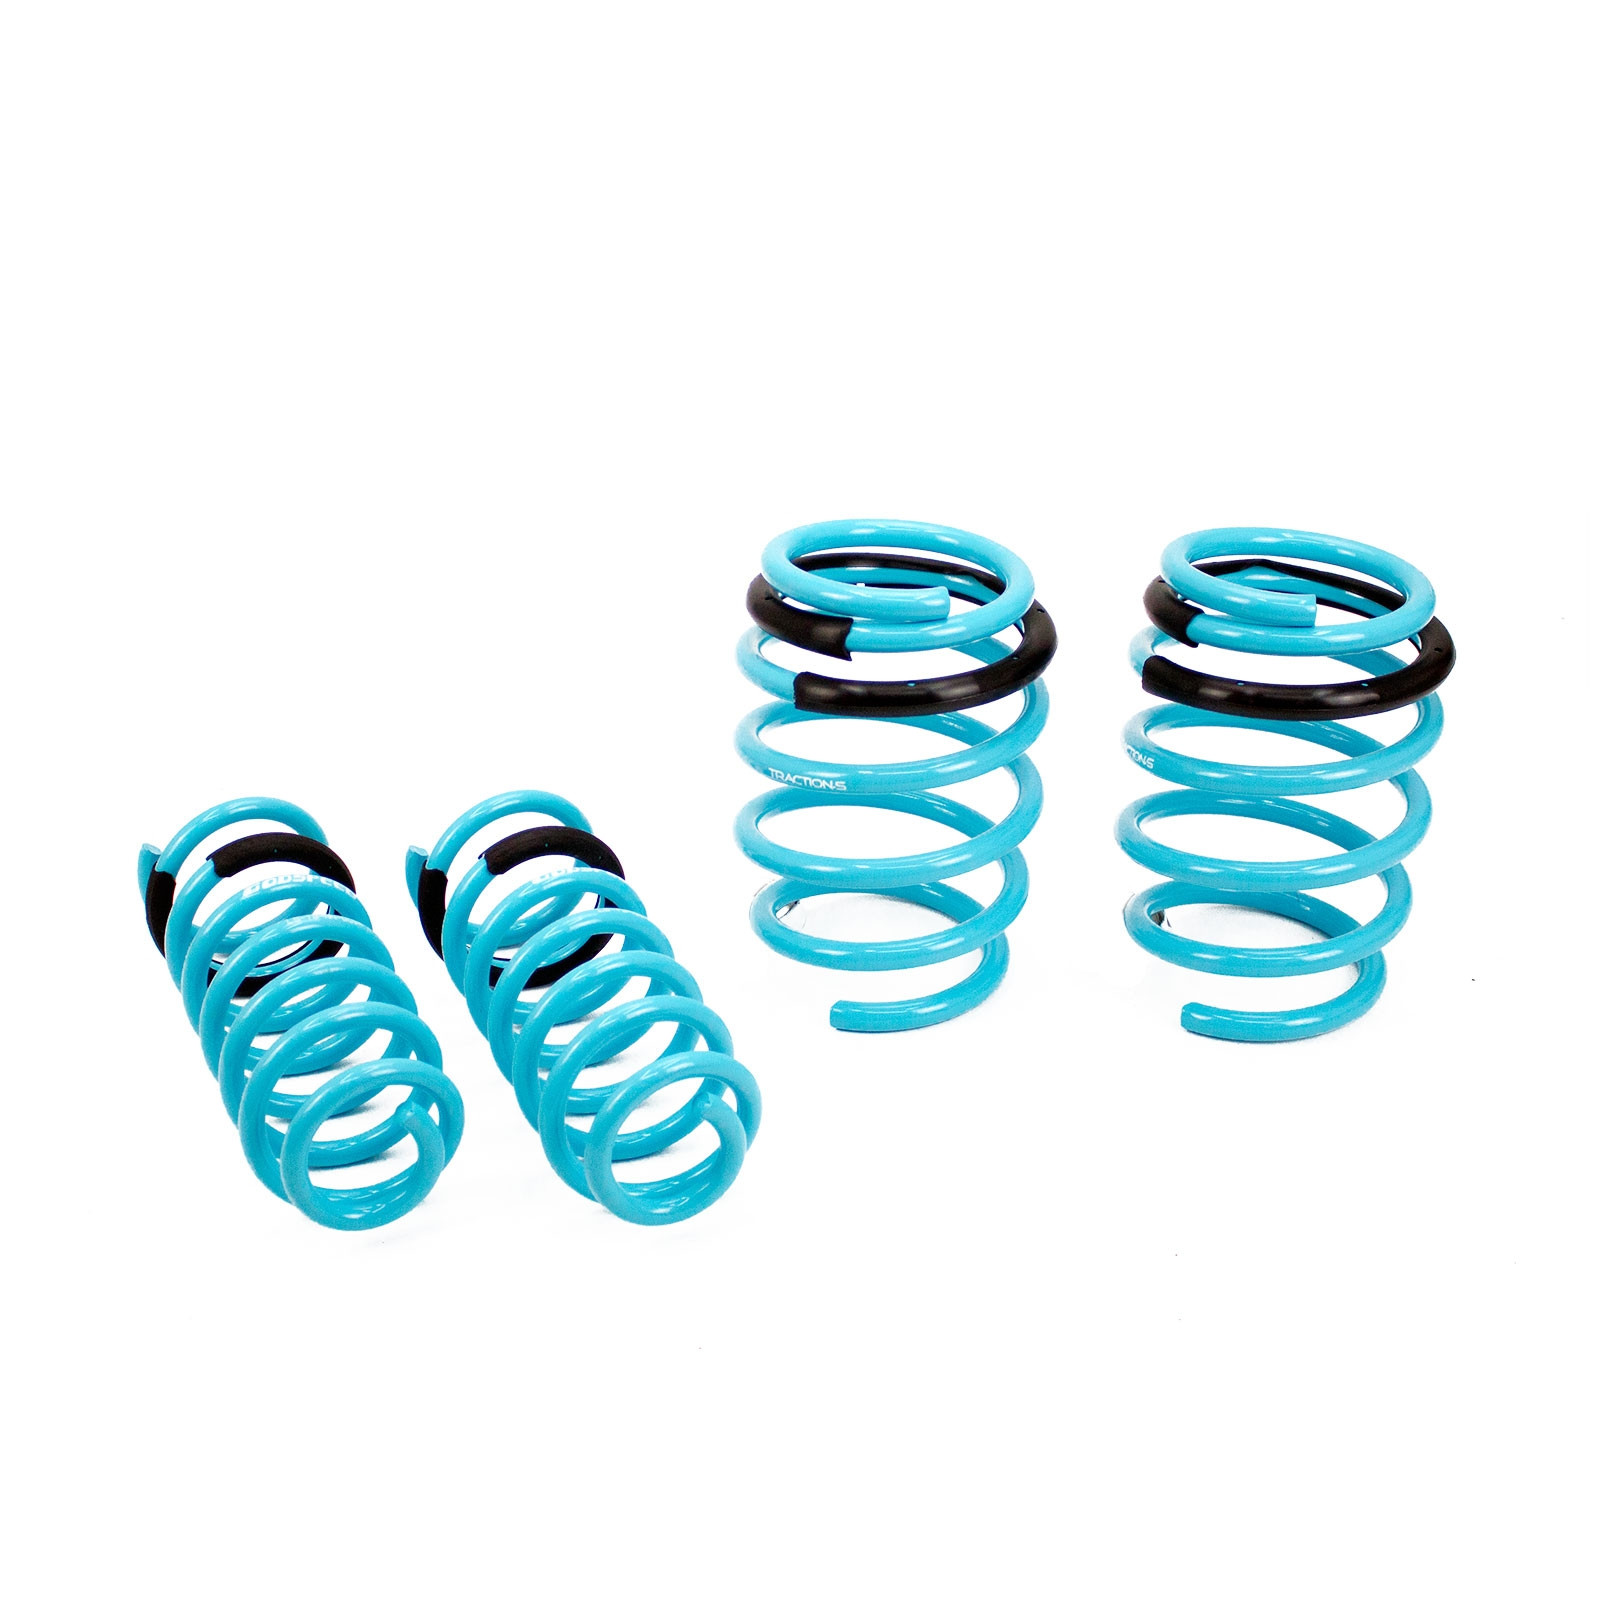 2007-12 B16 Godspeed Traction-S Lowering Springs For Nissan Sentra 